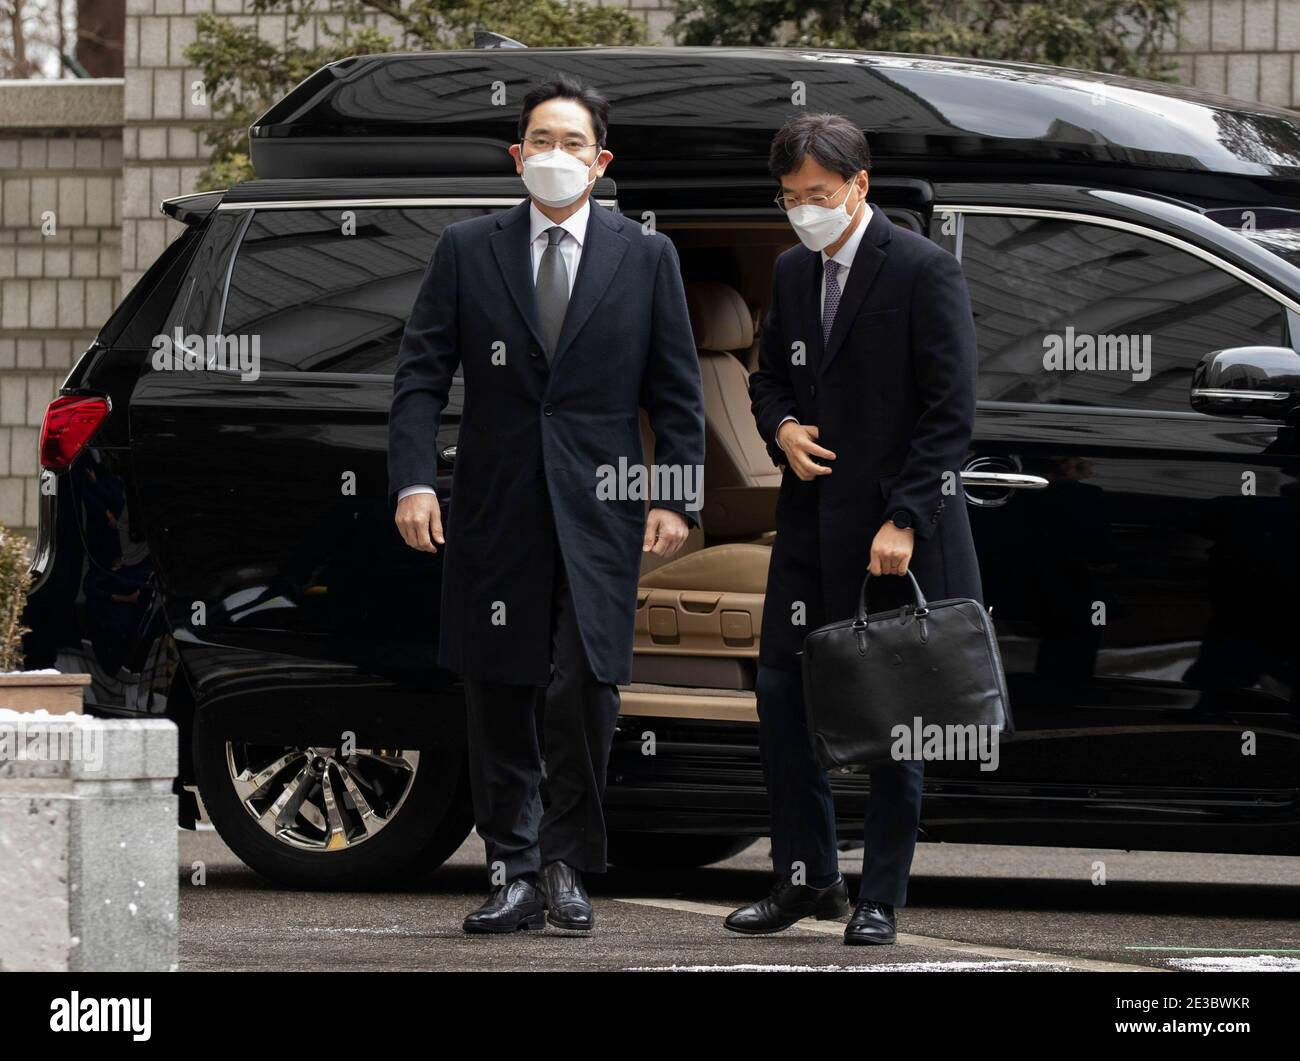 (210118) -- SEOUL, Jan. 18, 2021 (Xinhua) -- Samsung Electronics Vice Chairman Lee Jae-yong (L) arrives at the Seoul High Court in Seoul, South Korea, Jan. 18, 2021. The Seoul High Court sentenced Lee, an heir apparent of South Korea's biggest family-run conglomerate Samsung Group, to two and a half years in prison for corruption charges, including bribery. (Photo by Lee Sang-ho/Xinhua) Stock Photo